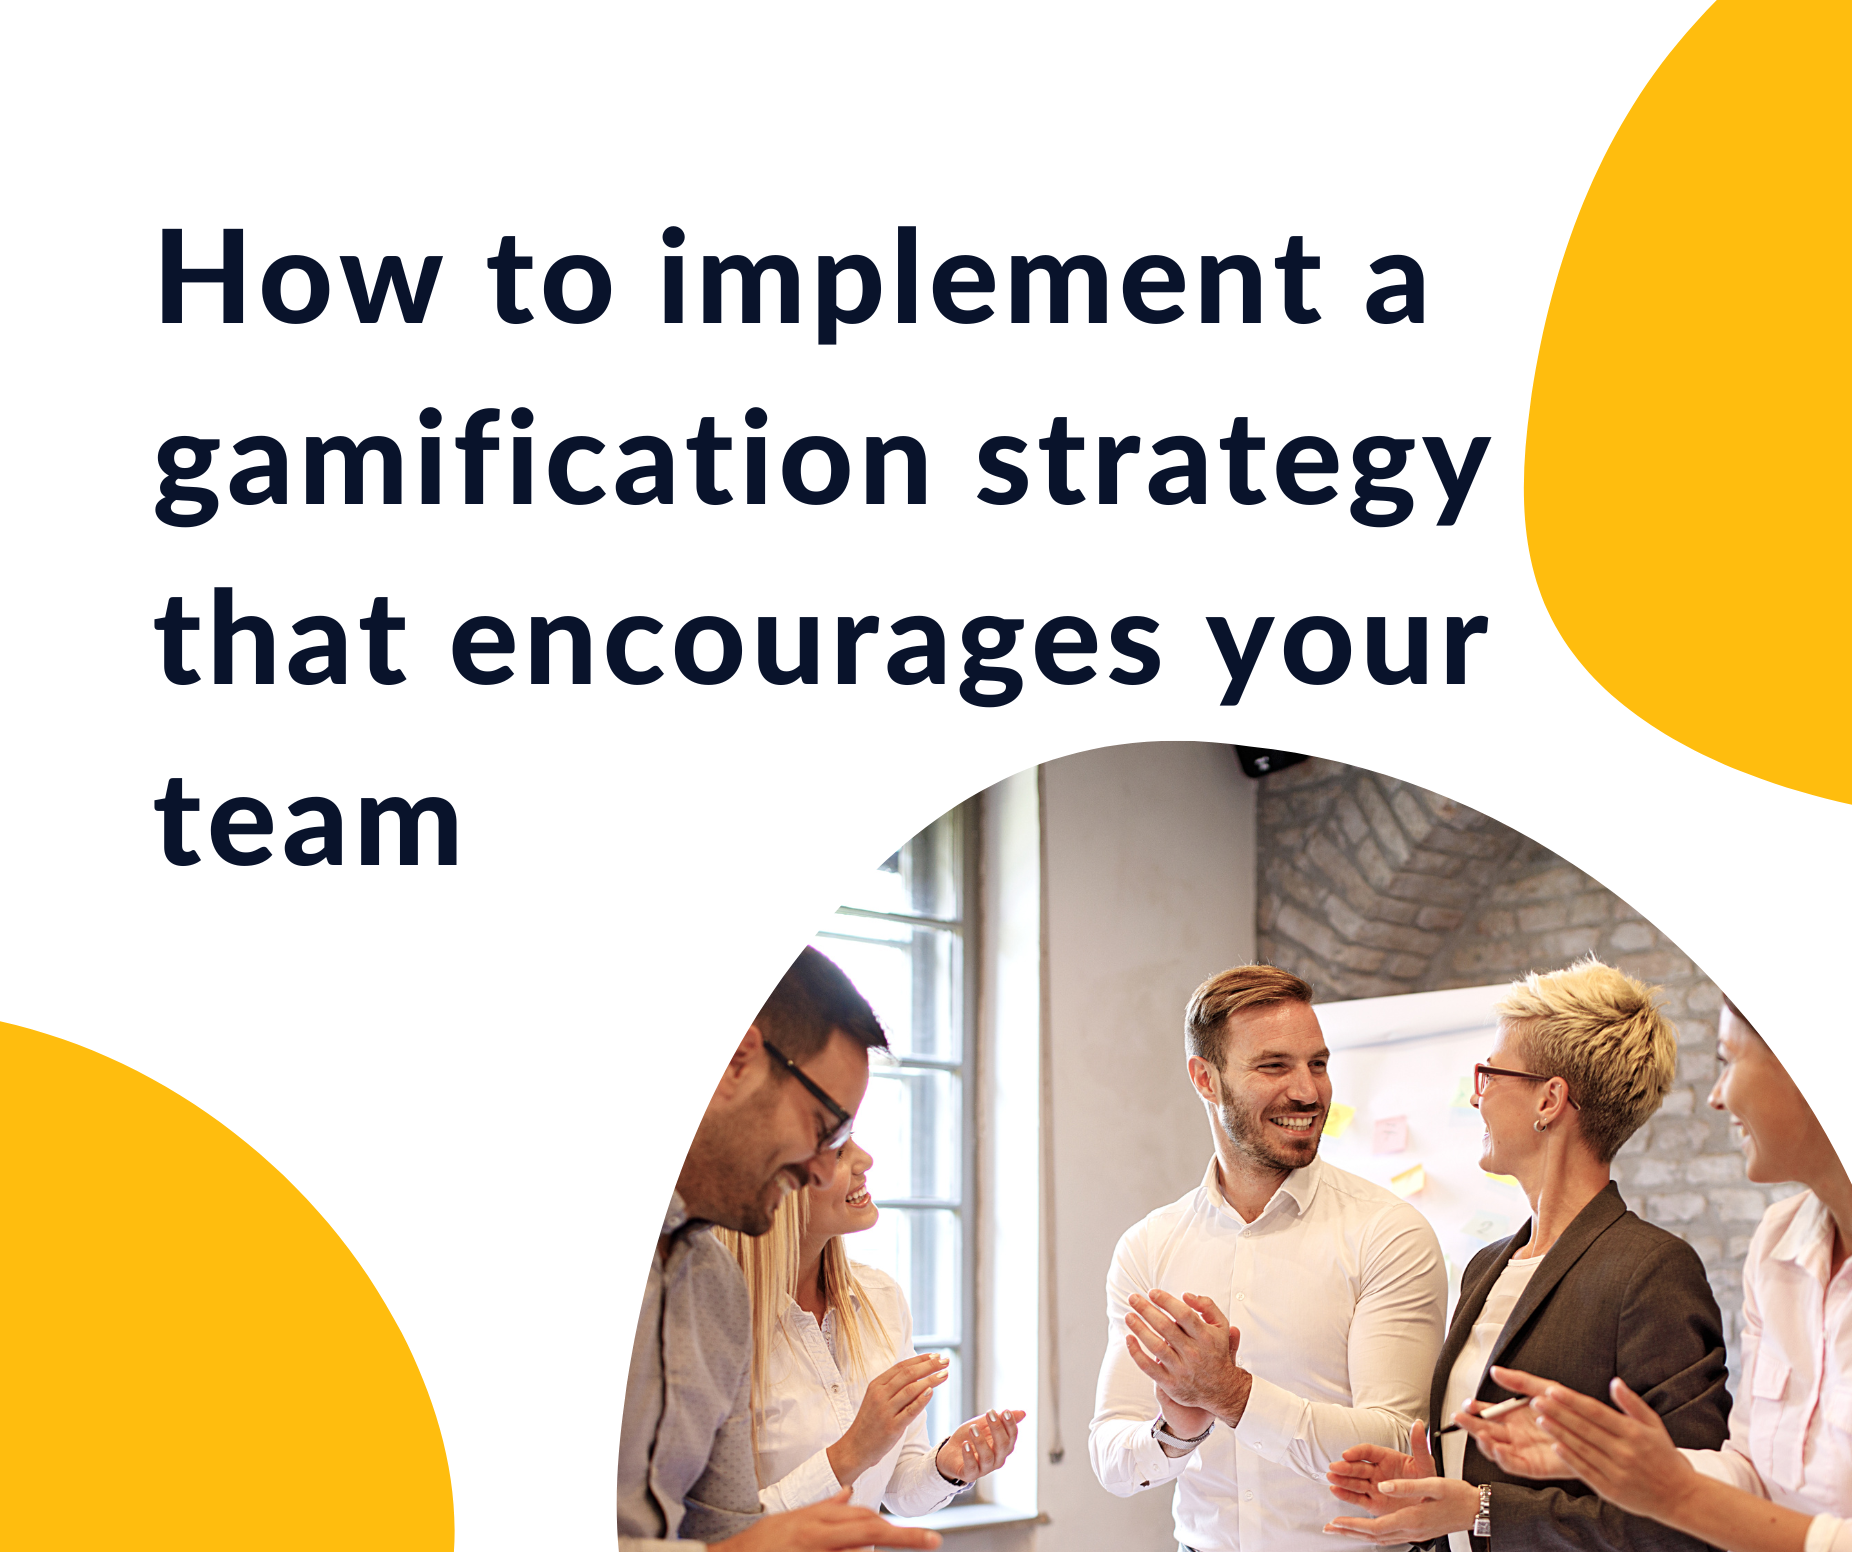 How to implement a gamification strategy that encourages your team